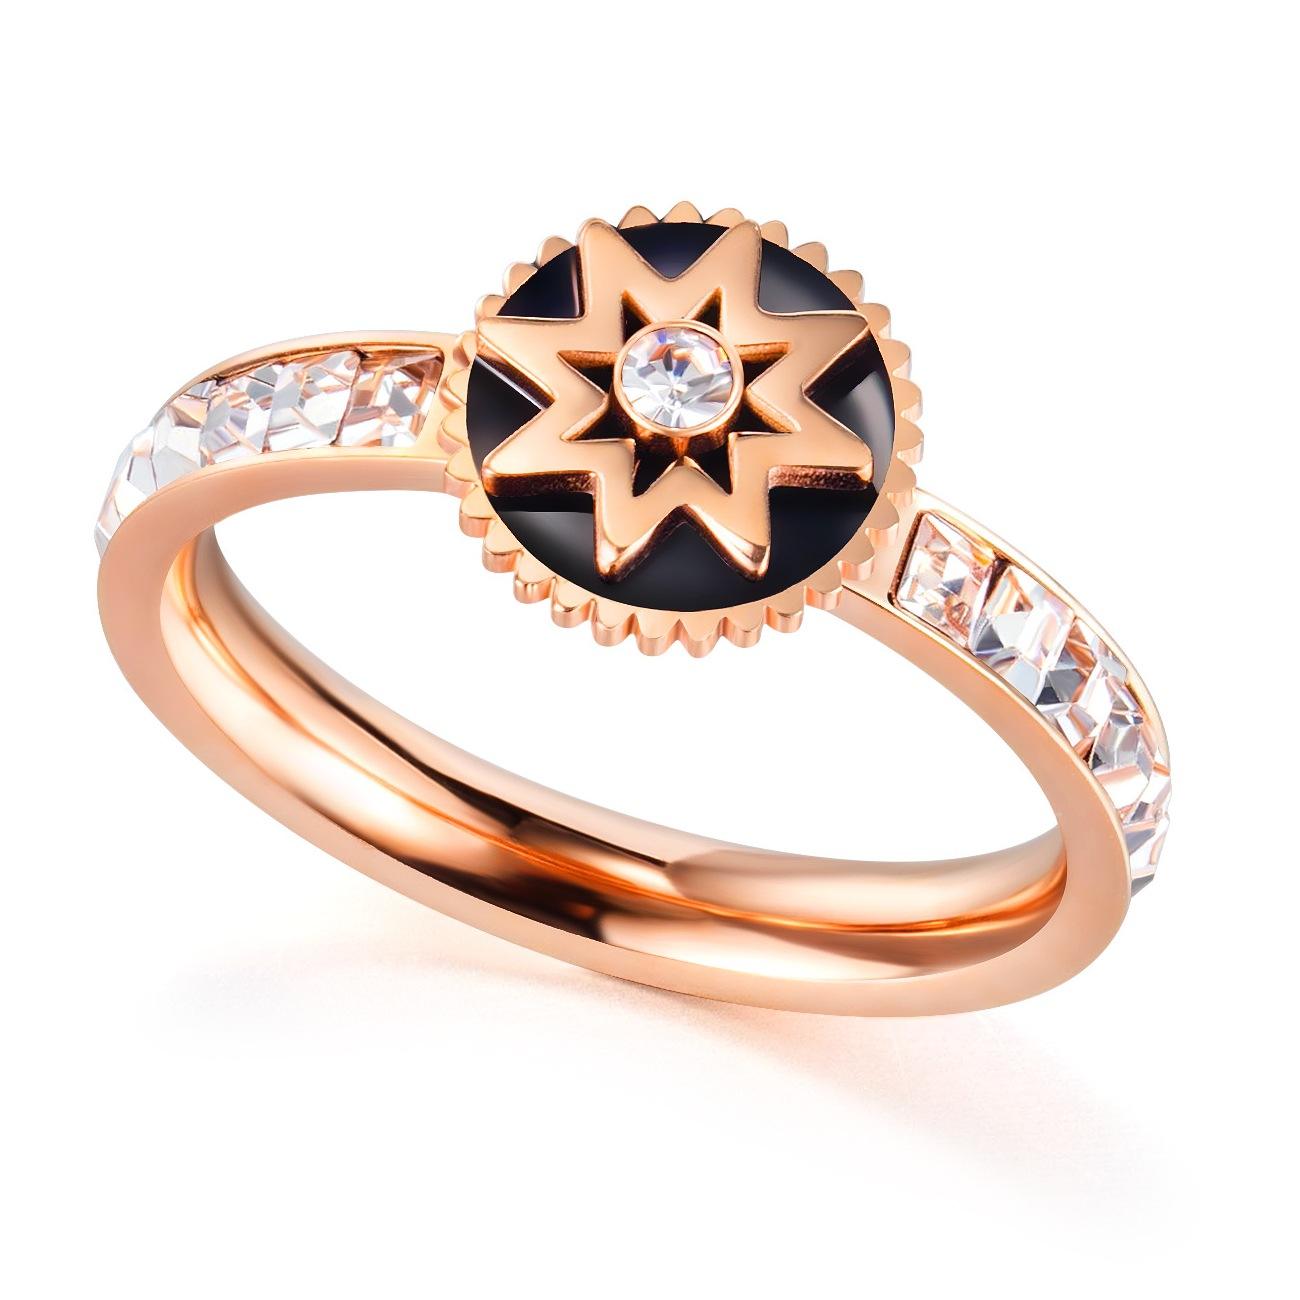 Star Zircon K Gold Plated Titanium Stainless Steel Rings Women Fashion Gift Jewelry Wholesale AG JEWELRY